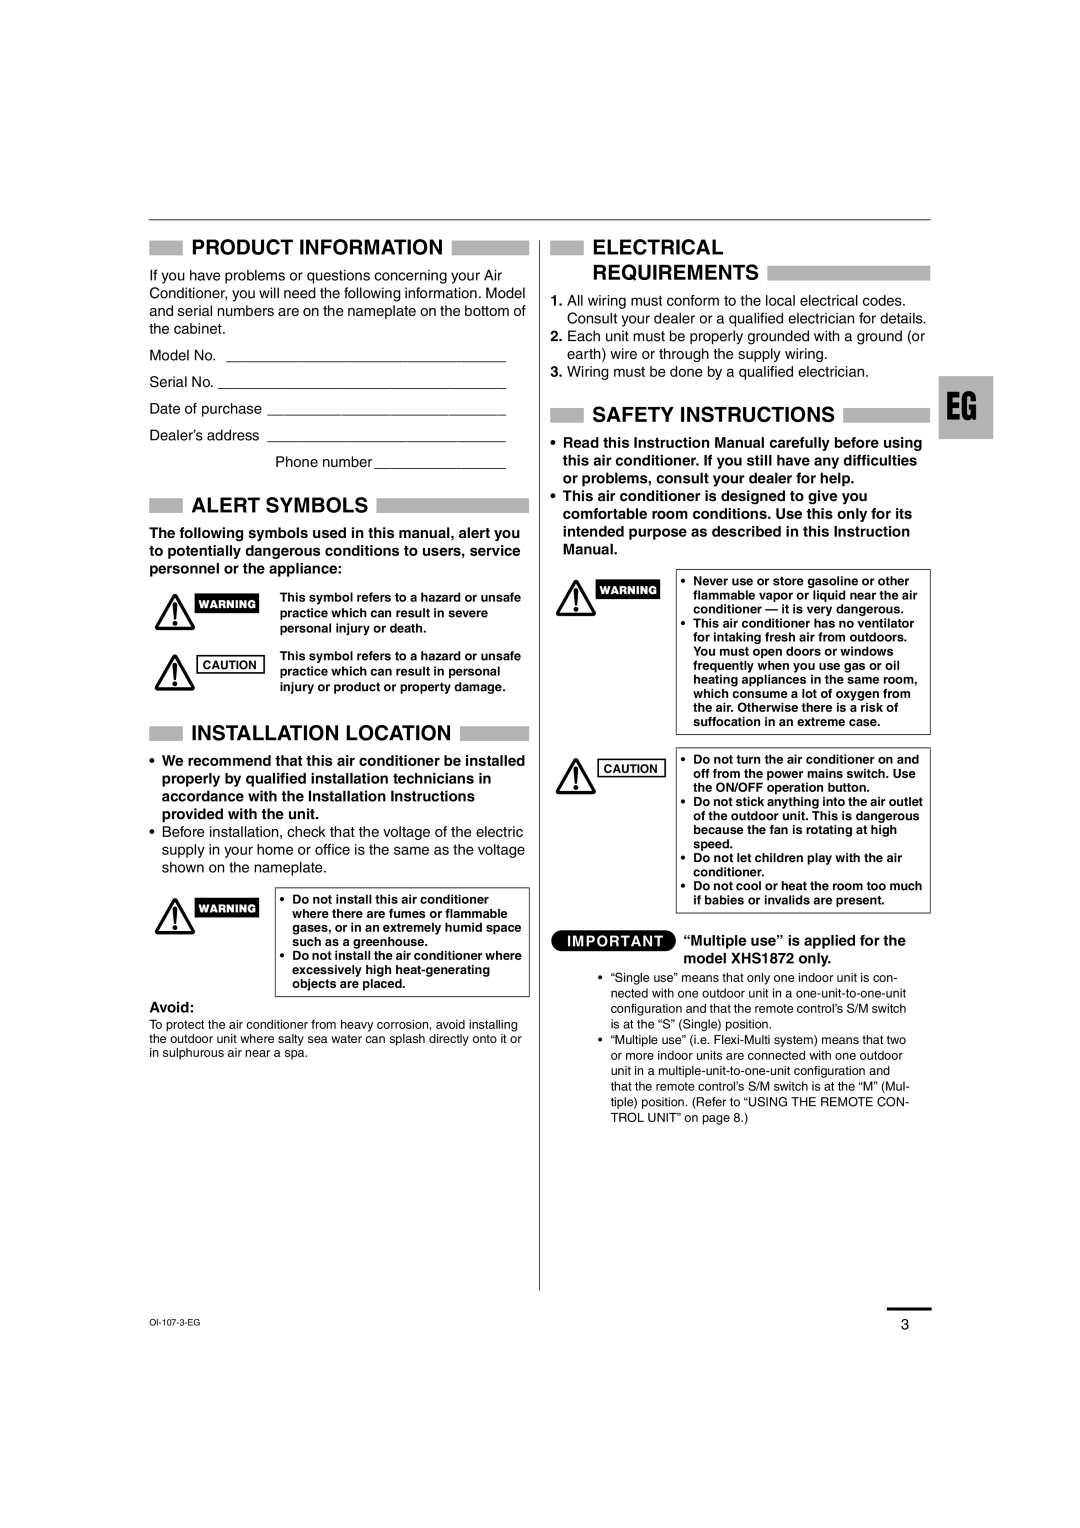 Sanyo XMHS1272 Product Information, Alert Symbols, Installation Location, Electrical Requirements, Safety Instructions 